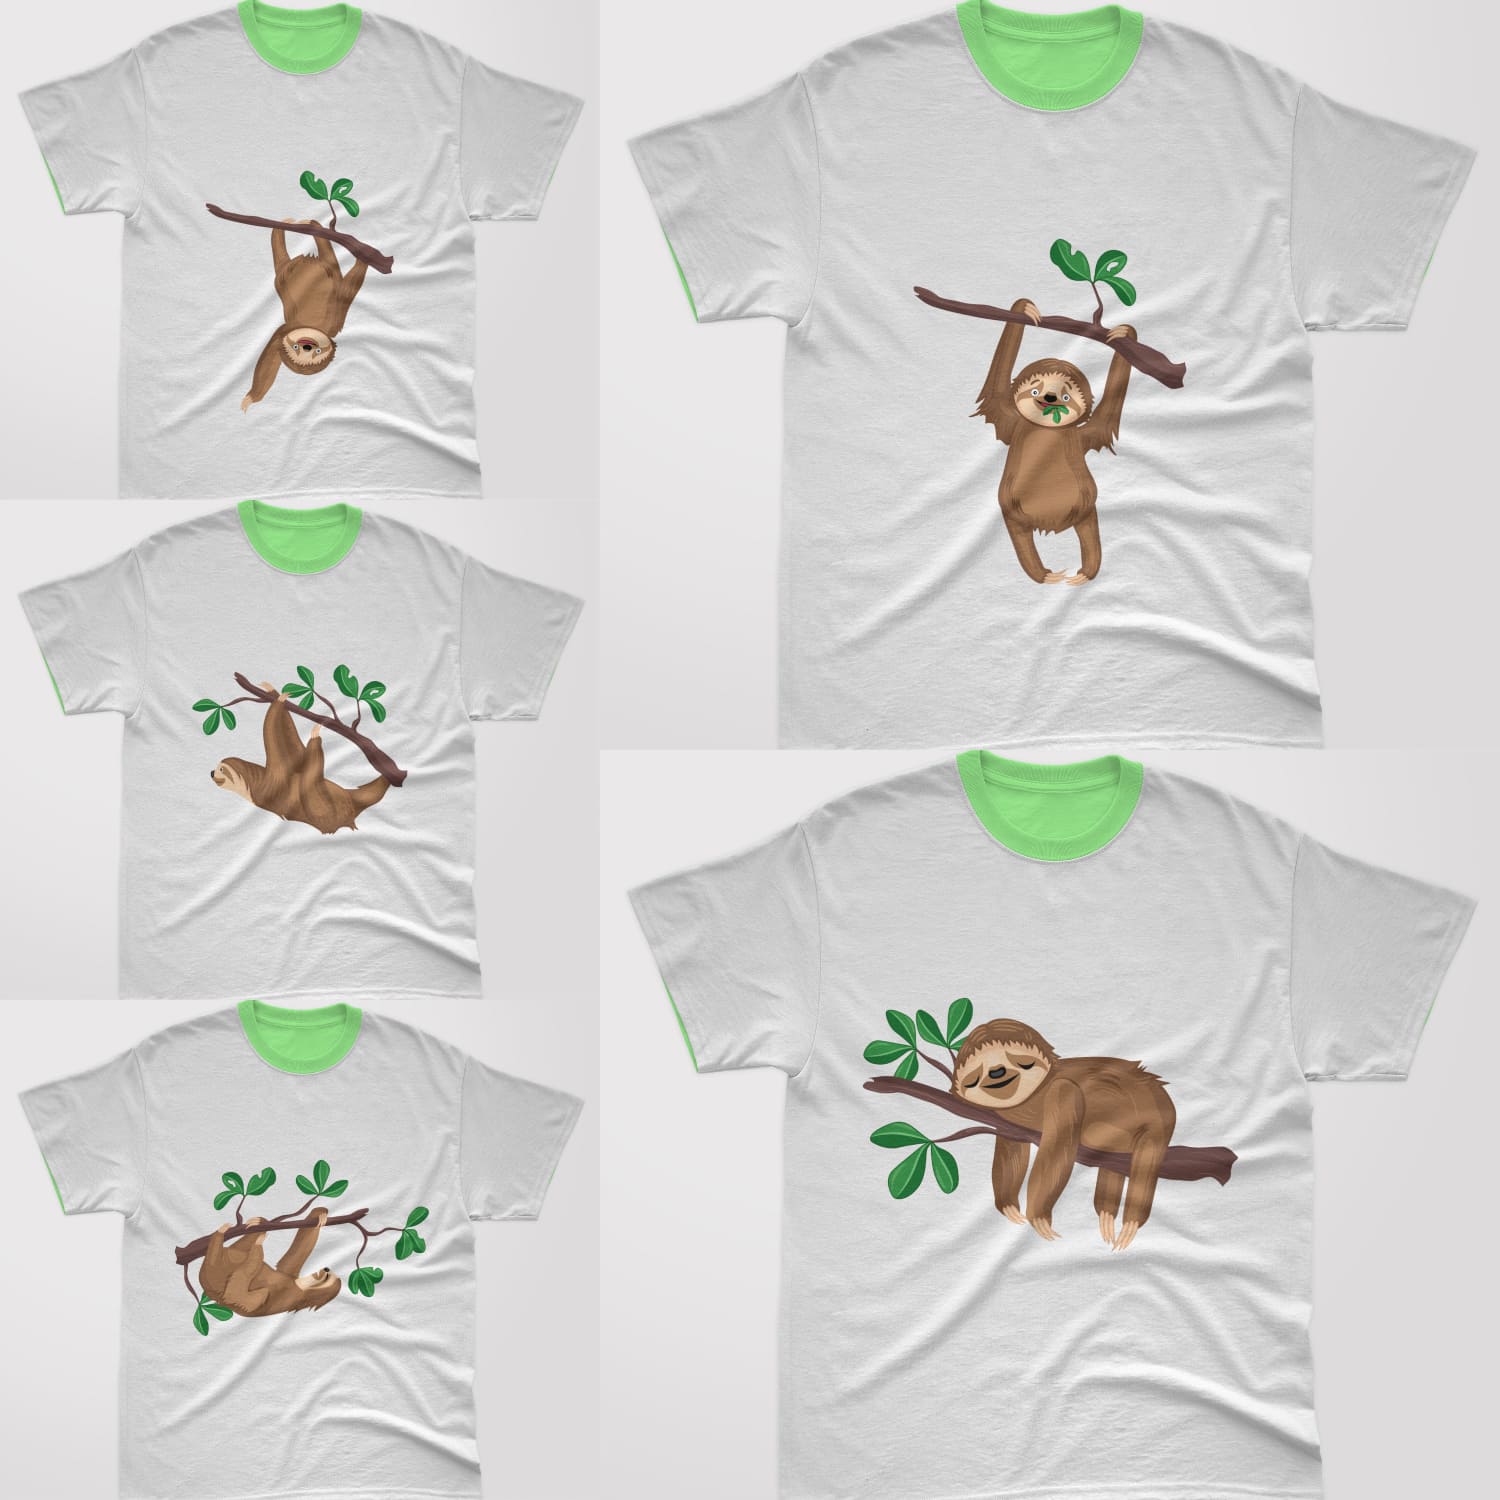 Collection of white t-shirts with cartoon sloth print.